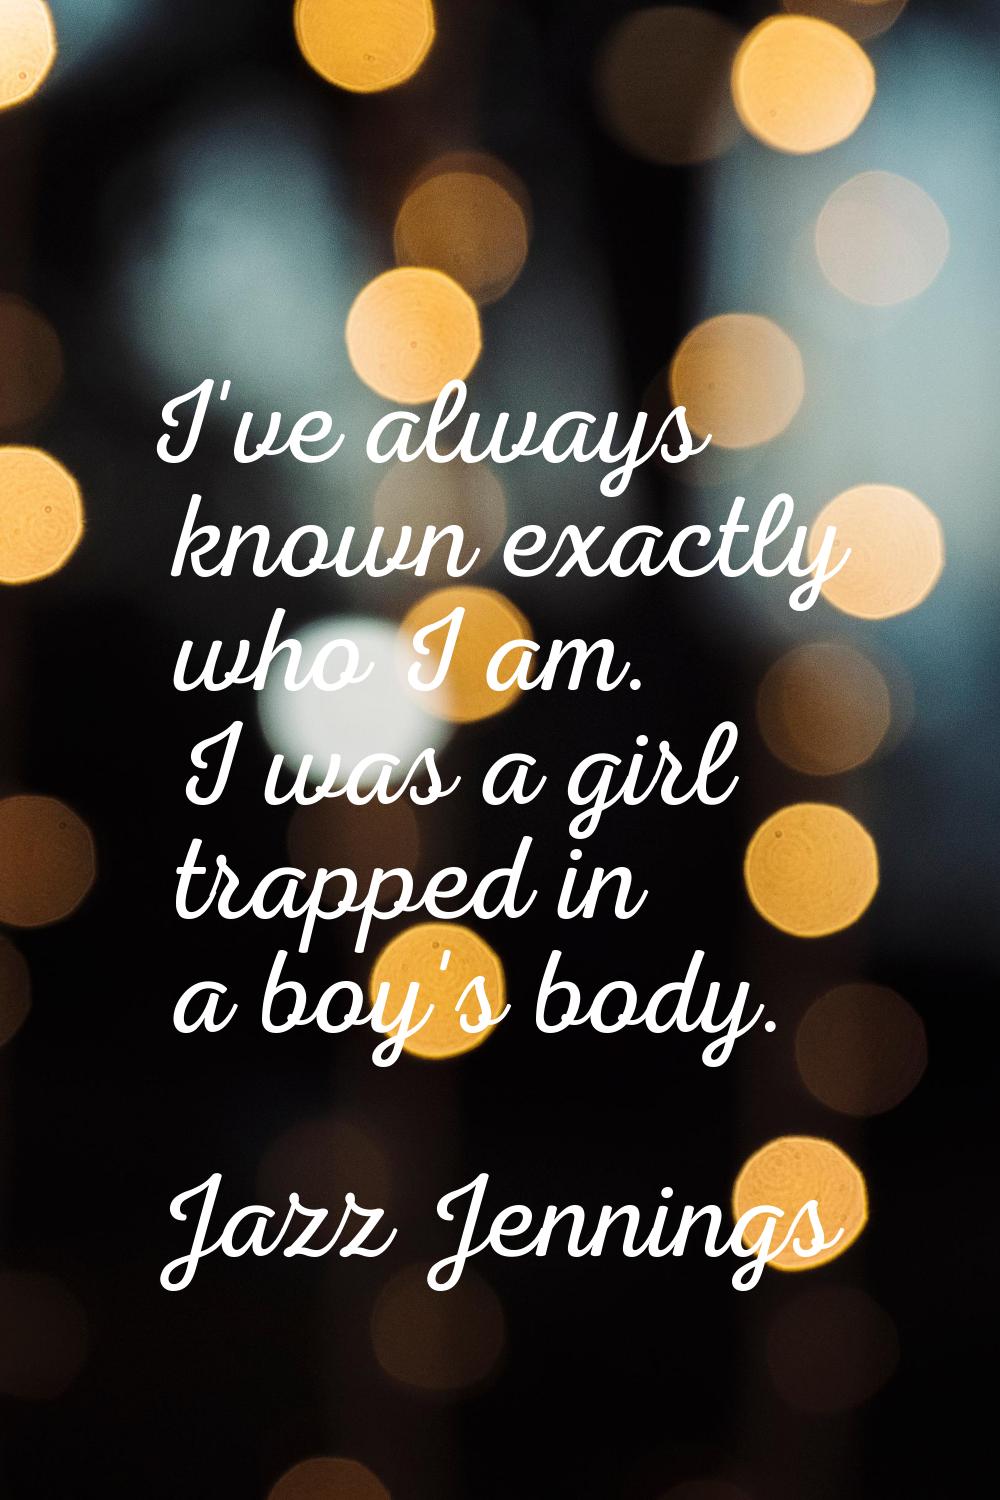 I've always known exactly who I am. I was a girl trapped in a boy's body.